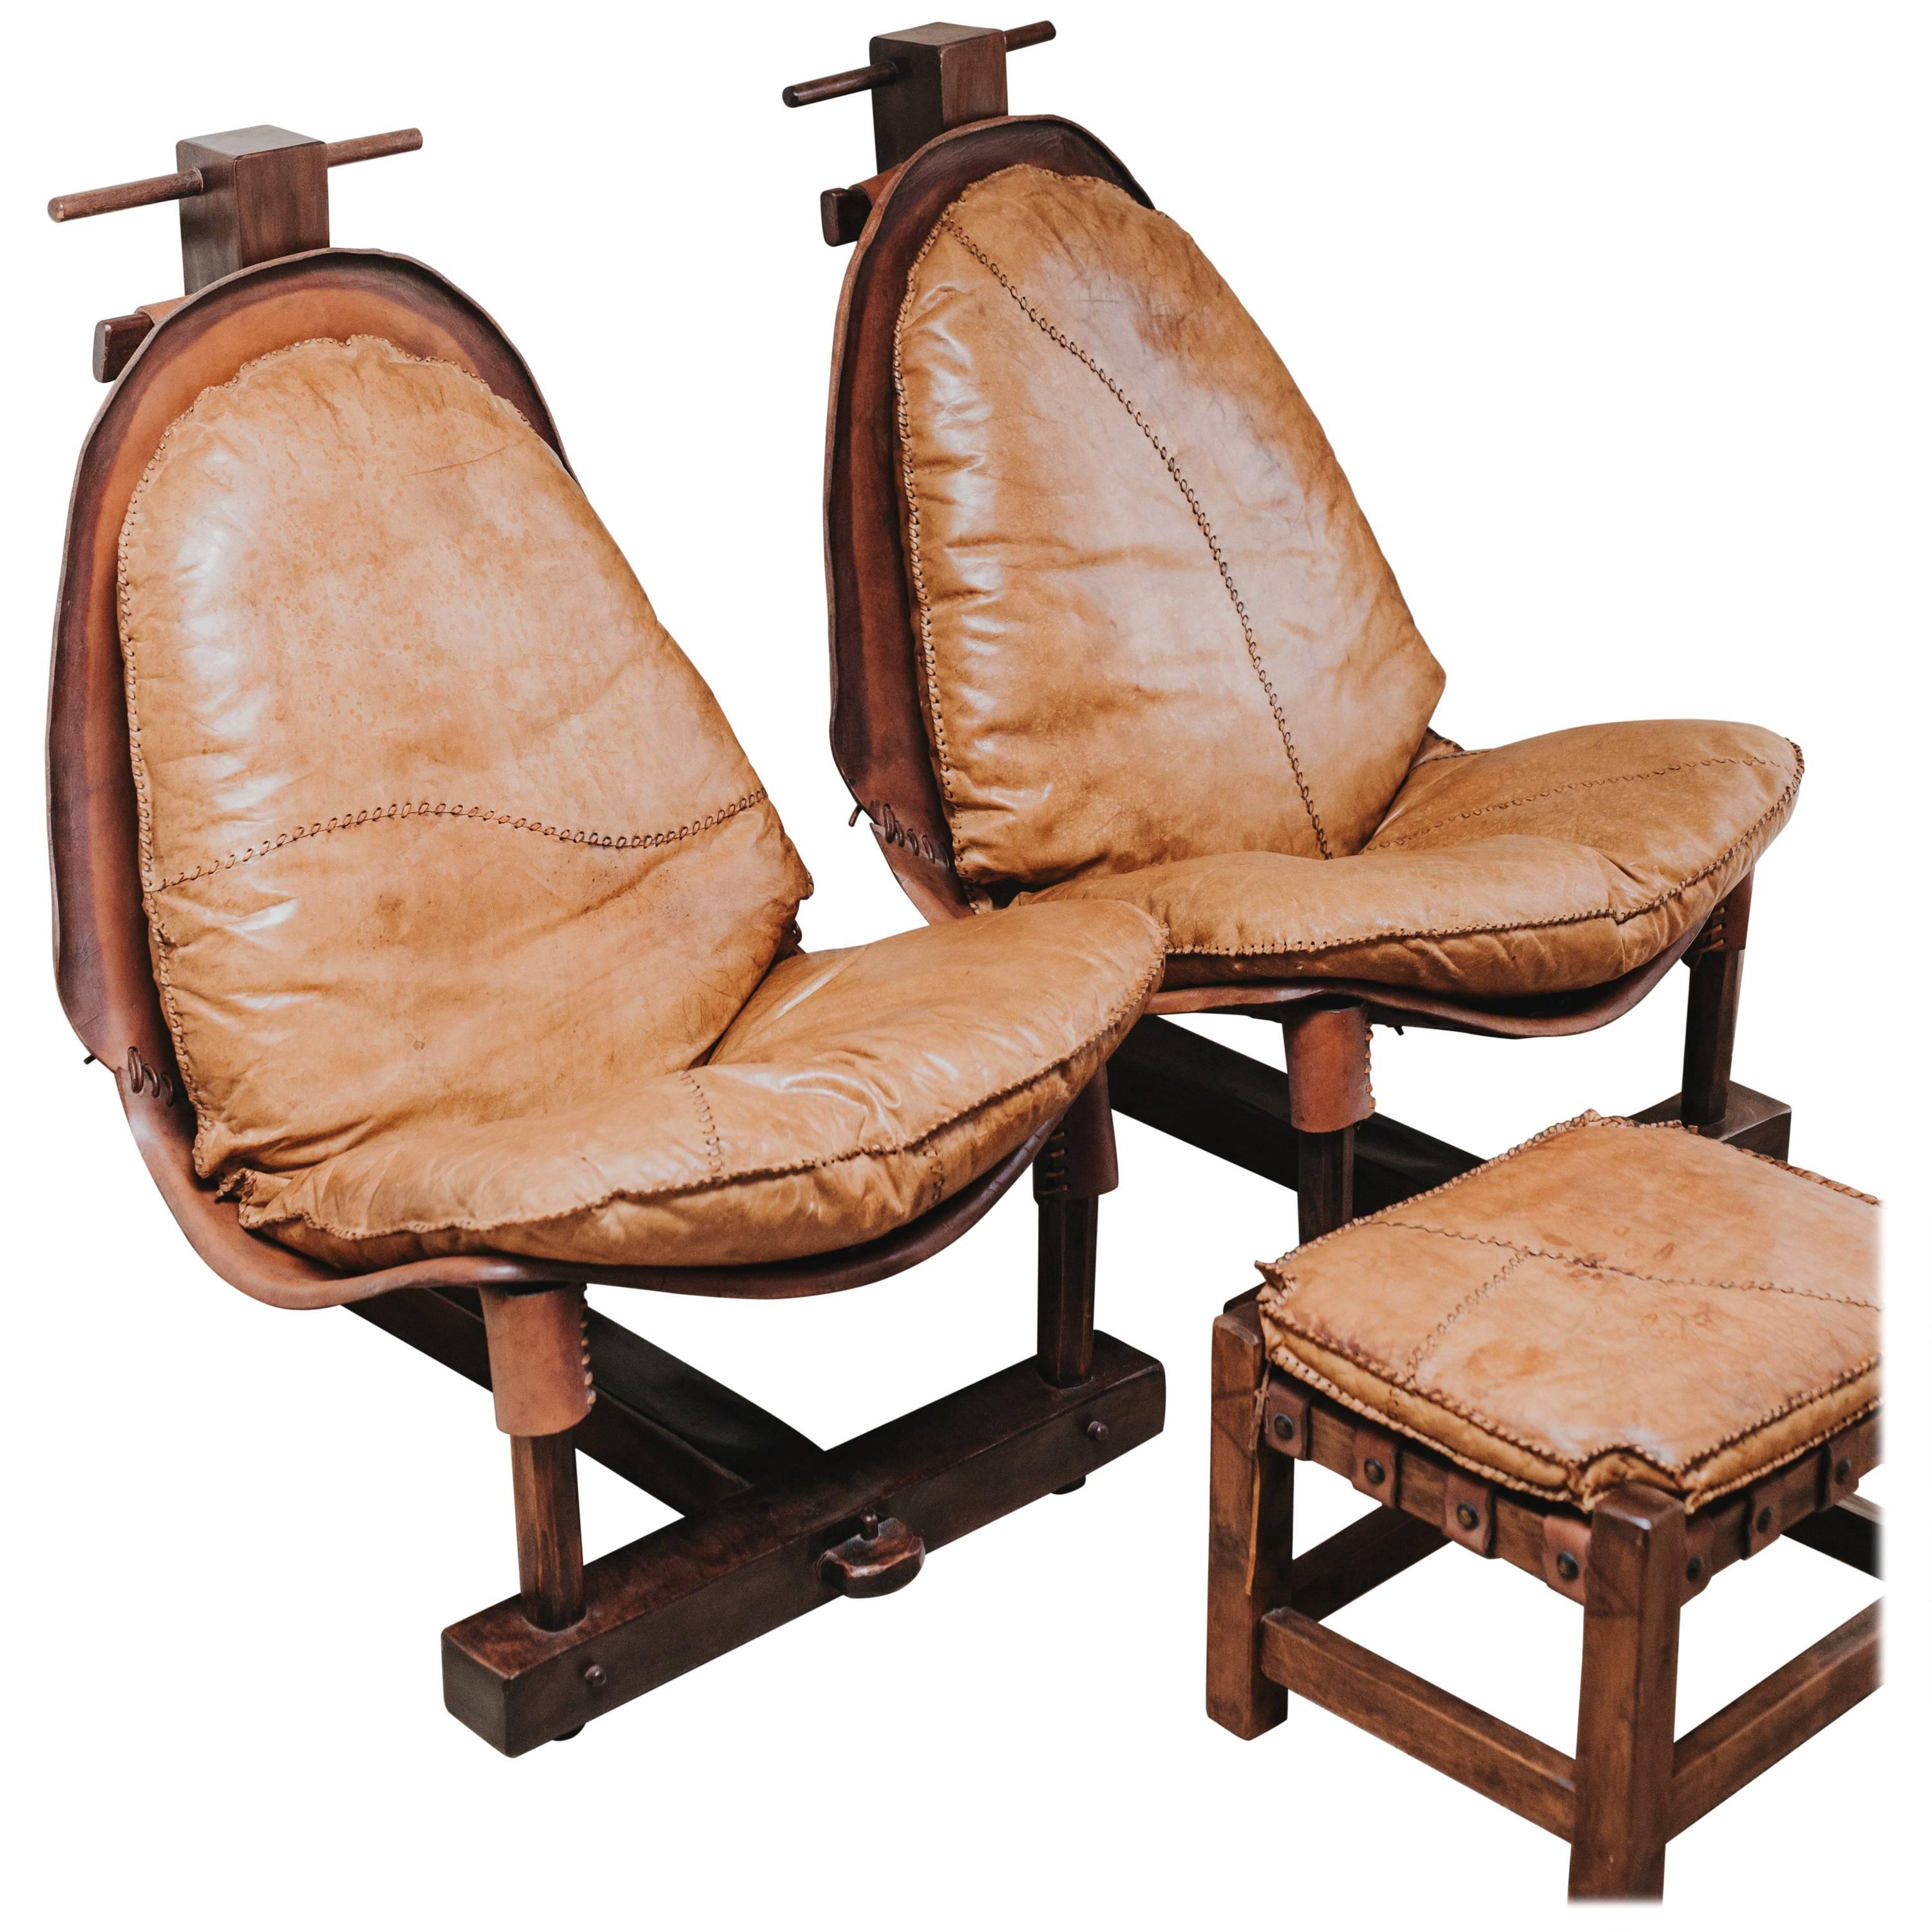 Pair of Brazilian Chairs and Ottoman